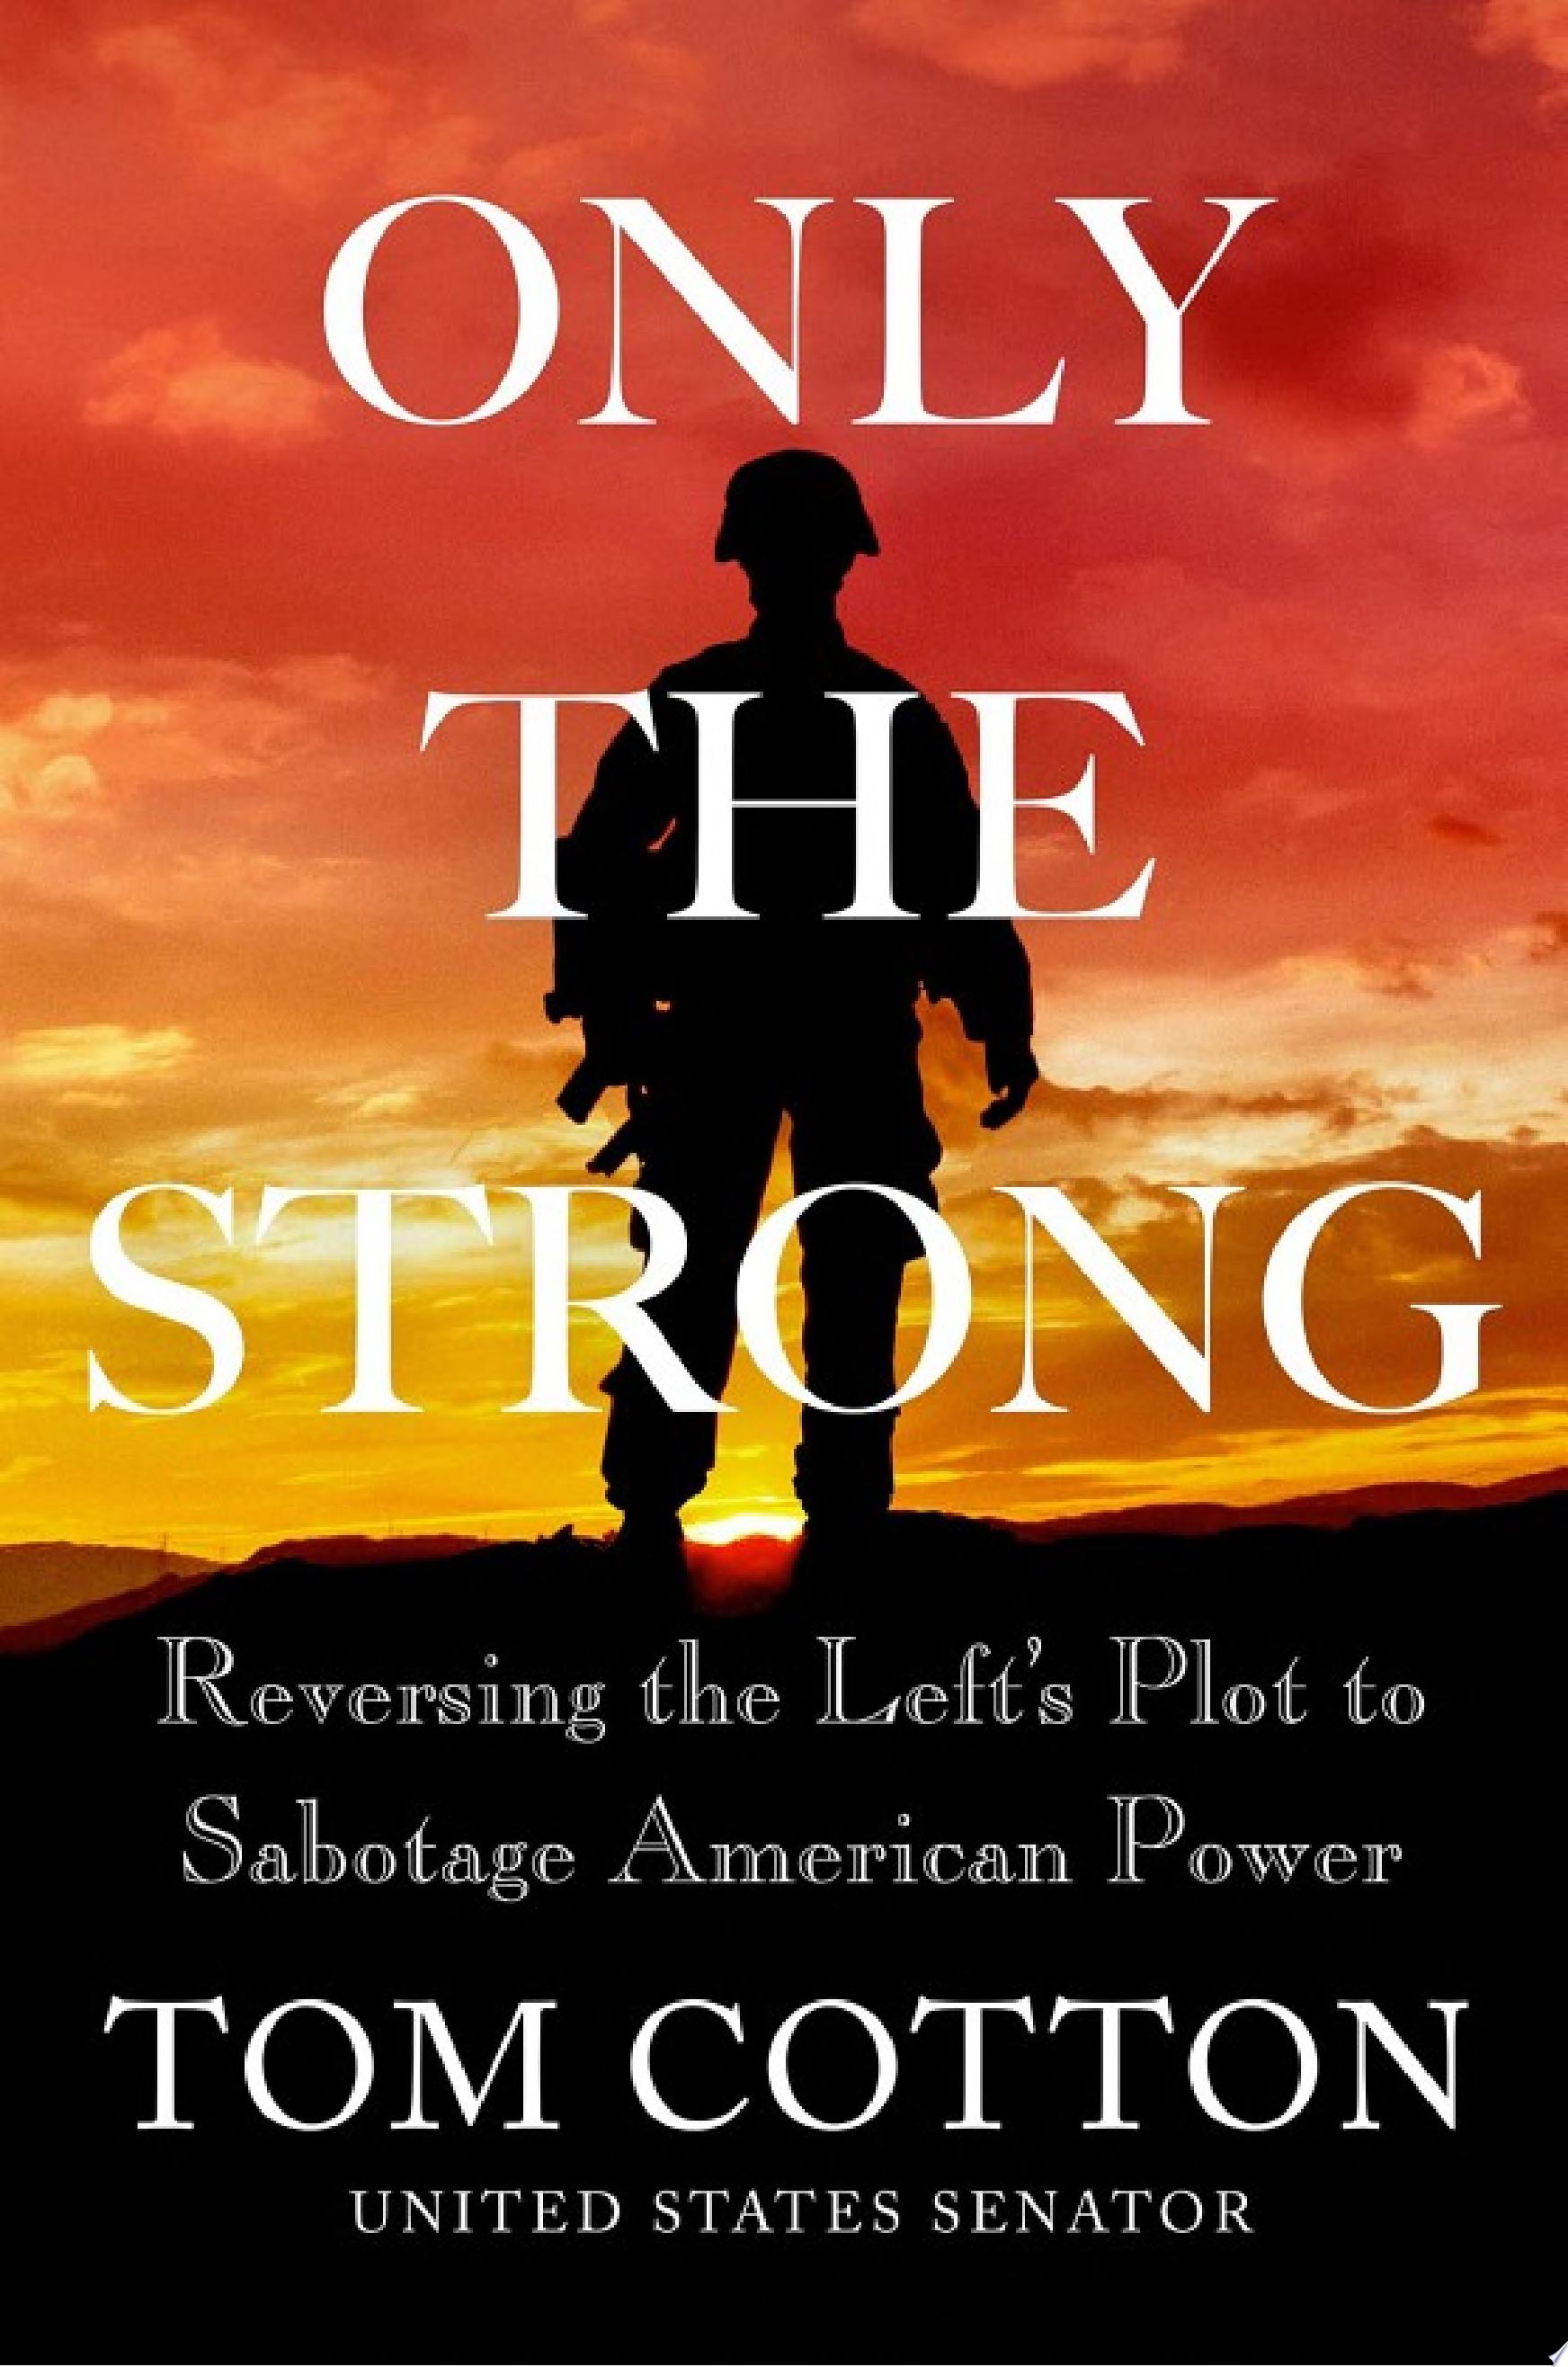 Image for "Only the Strong"